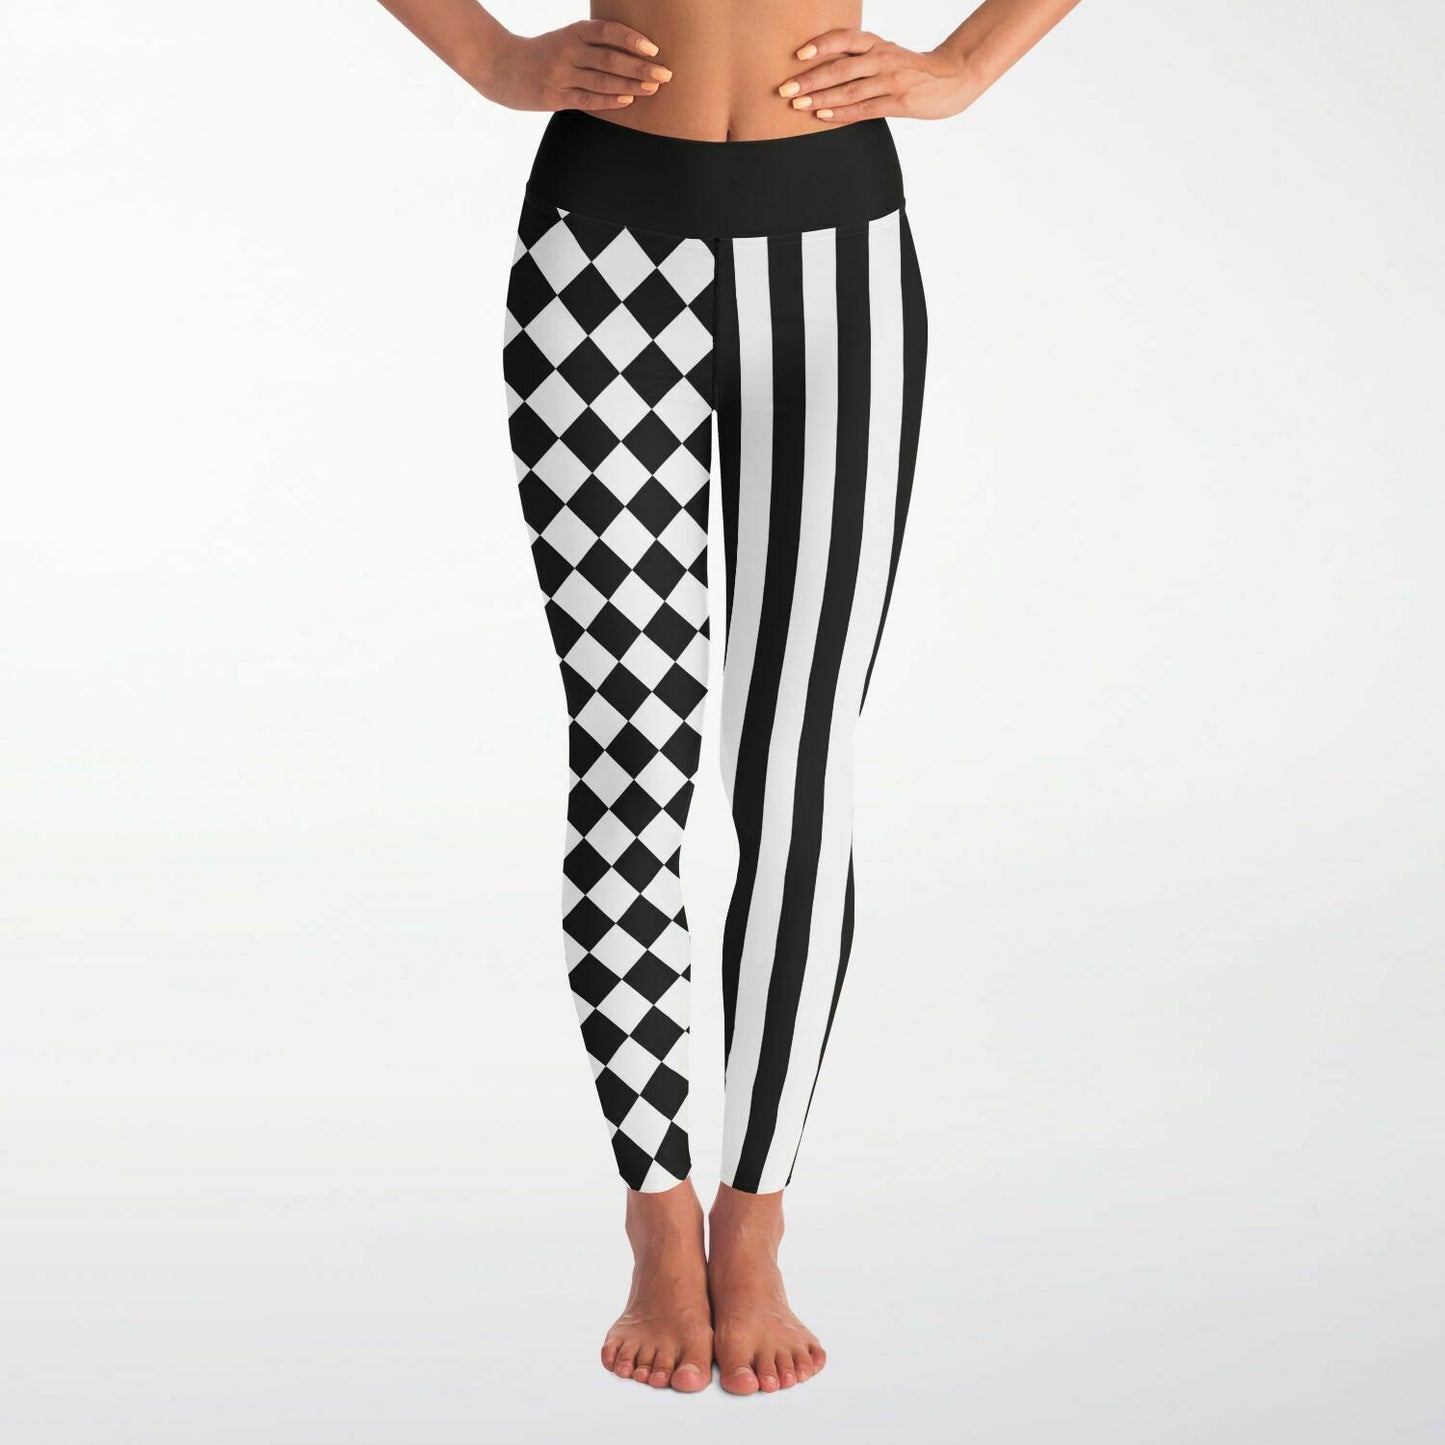 Yoga legging with checkers and stripes for balloon twisters, clowns, face painters and entertainers